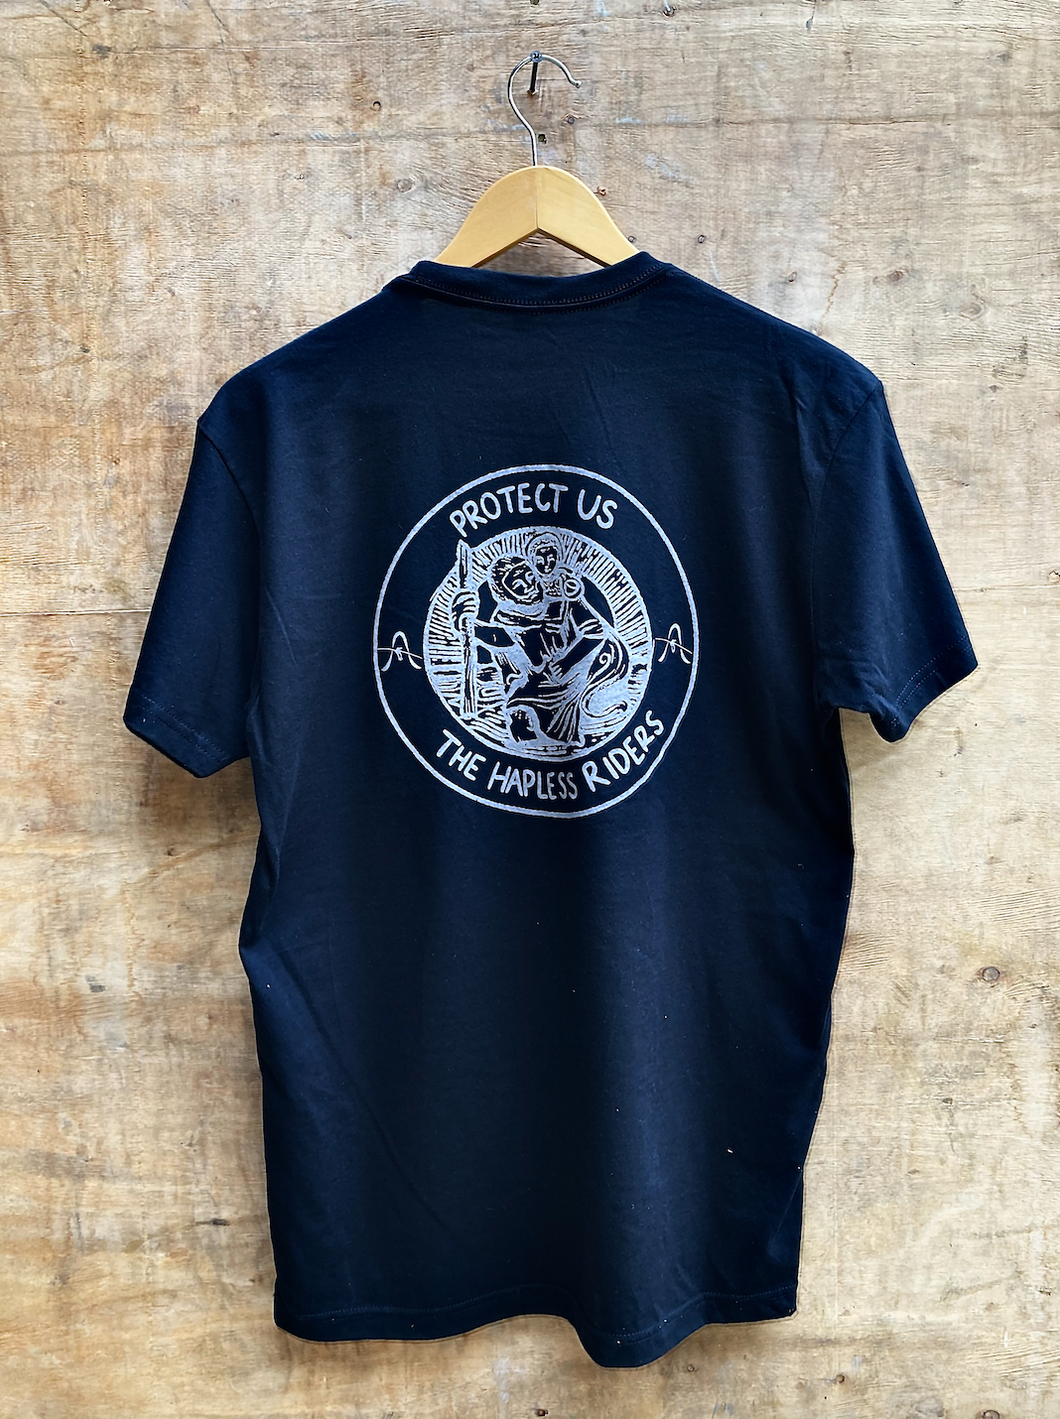 St. Christopher - Protect Us Tee